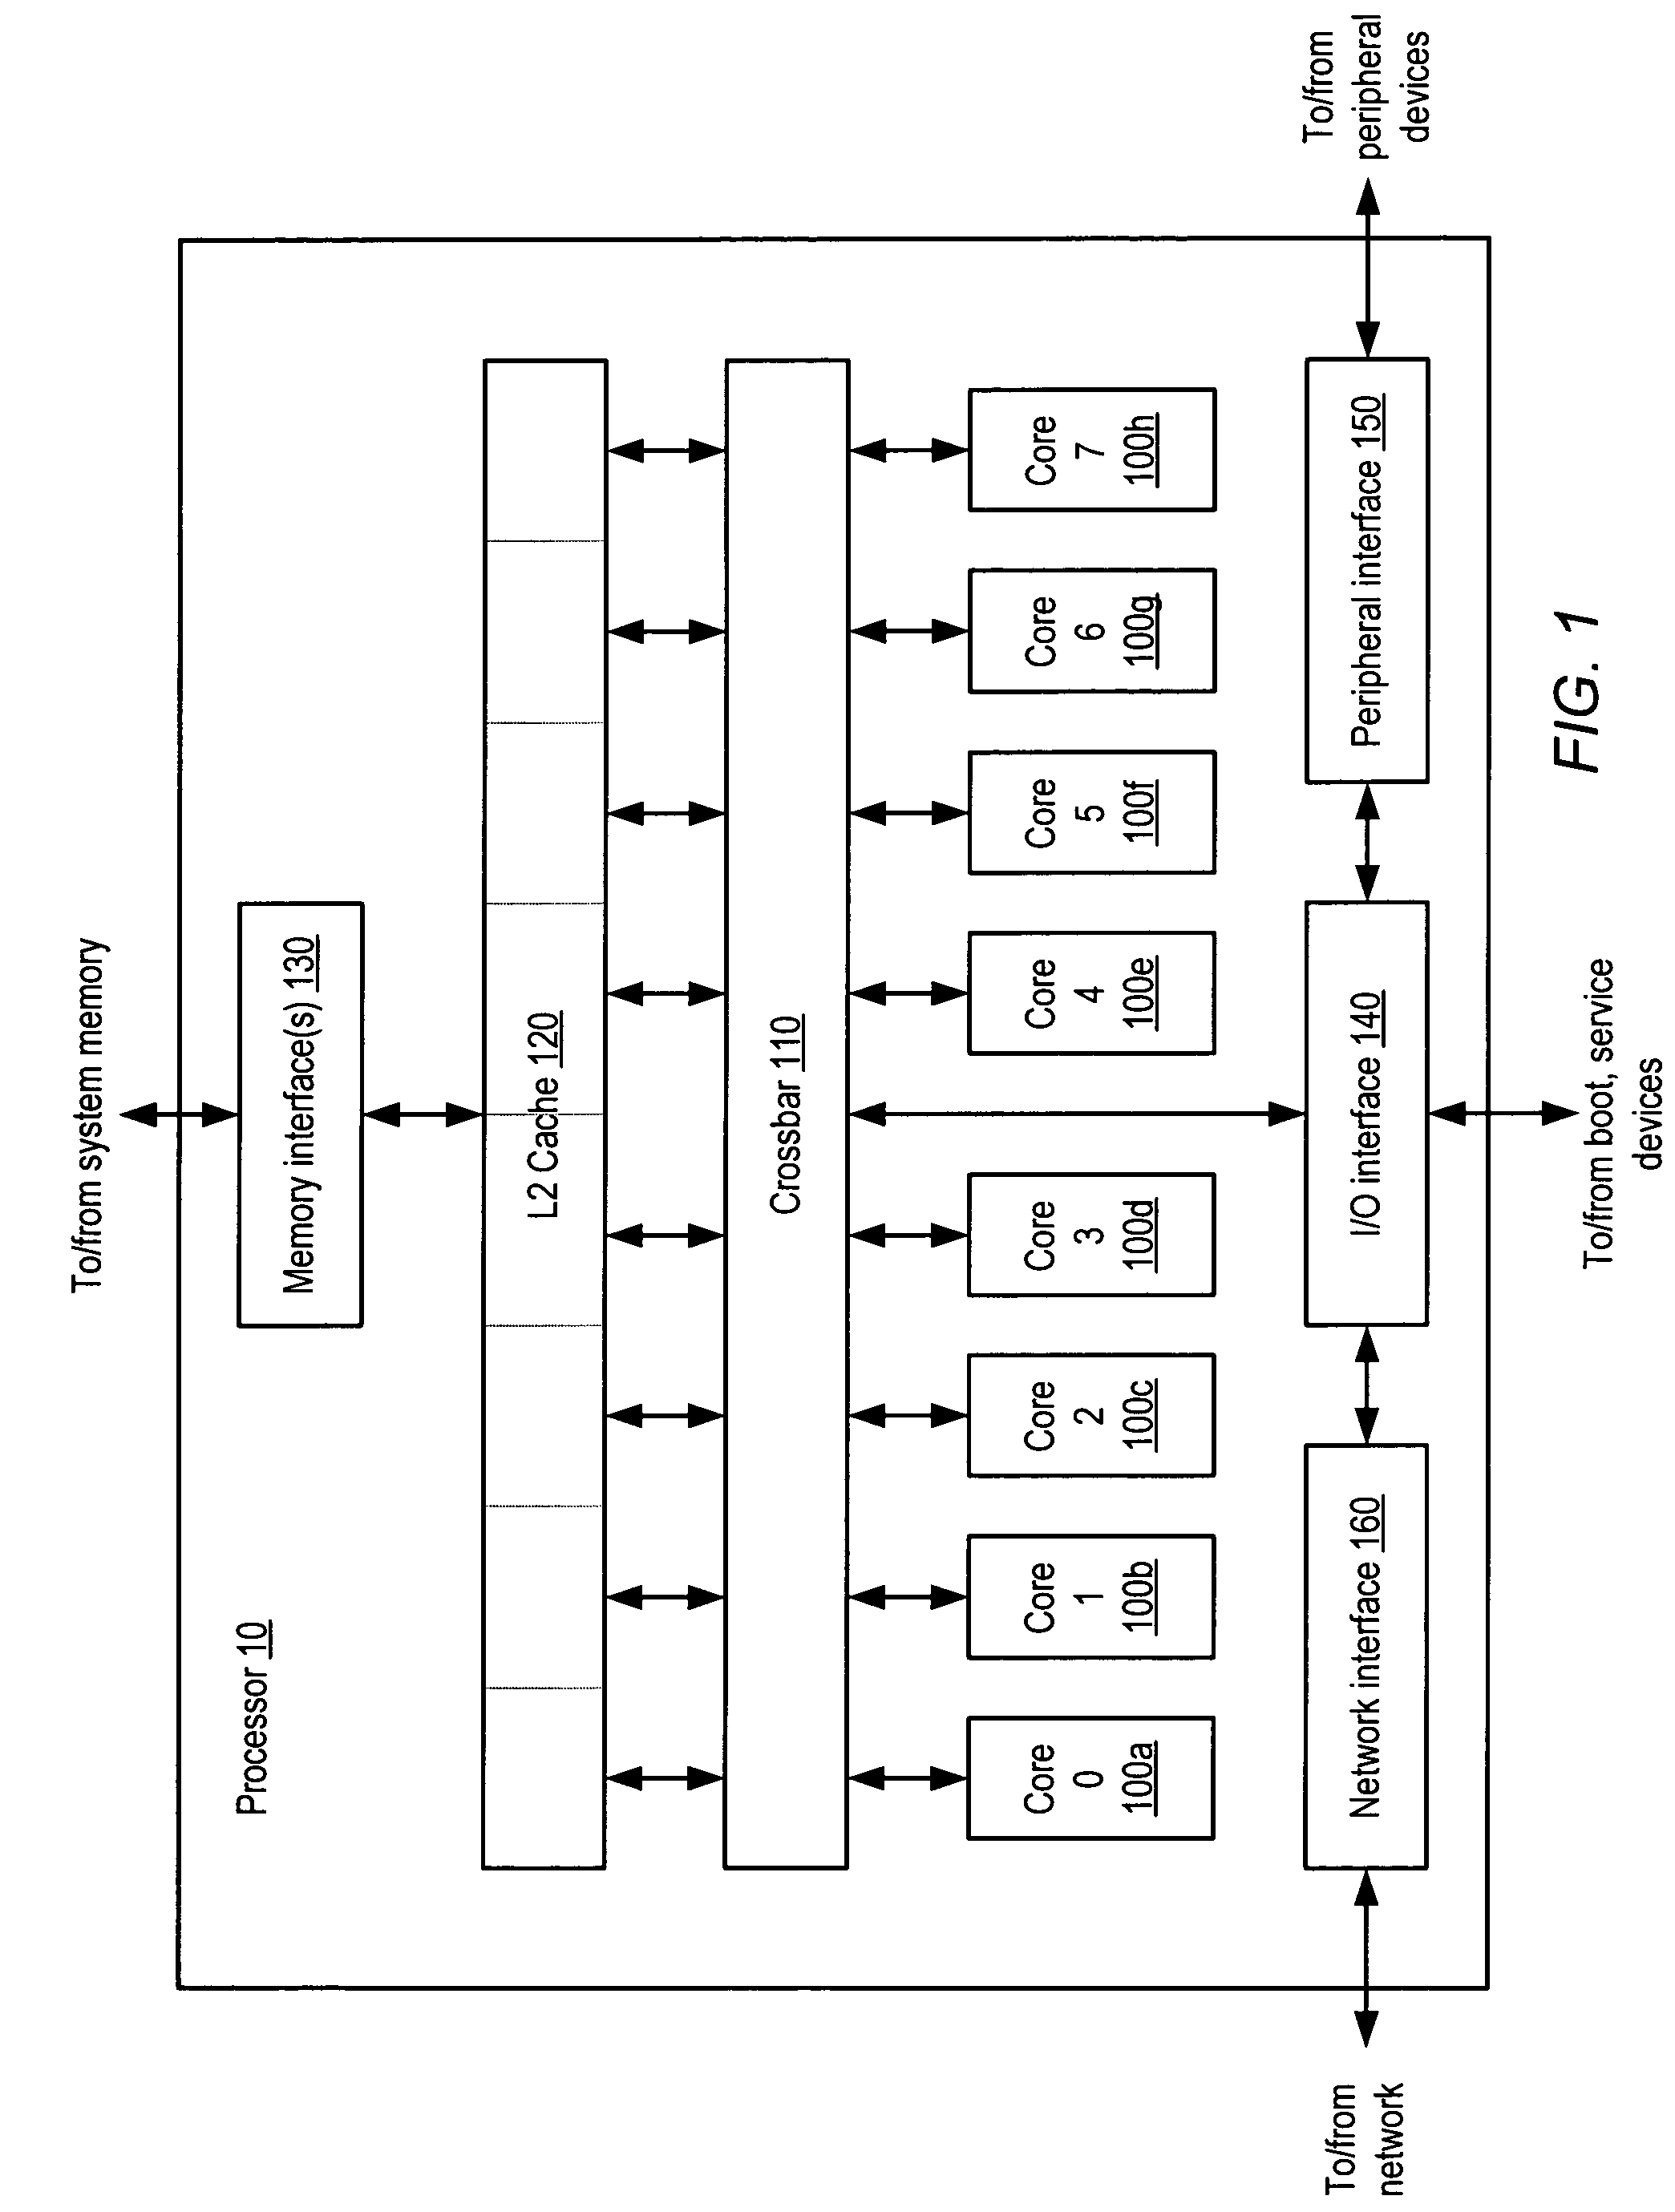 Multiple-core processor with flexible mapping of processor cores to cache banks